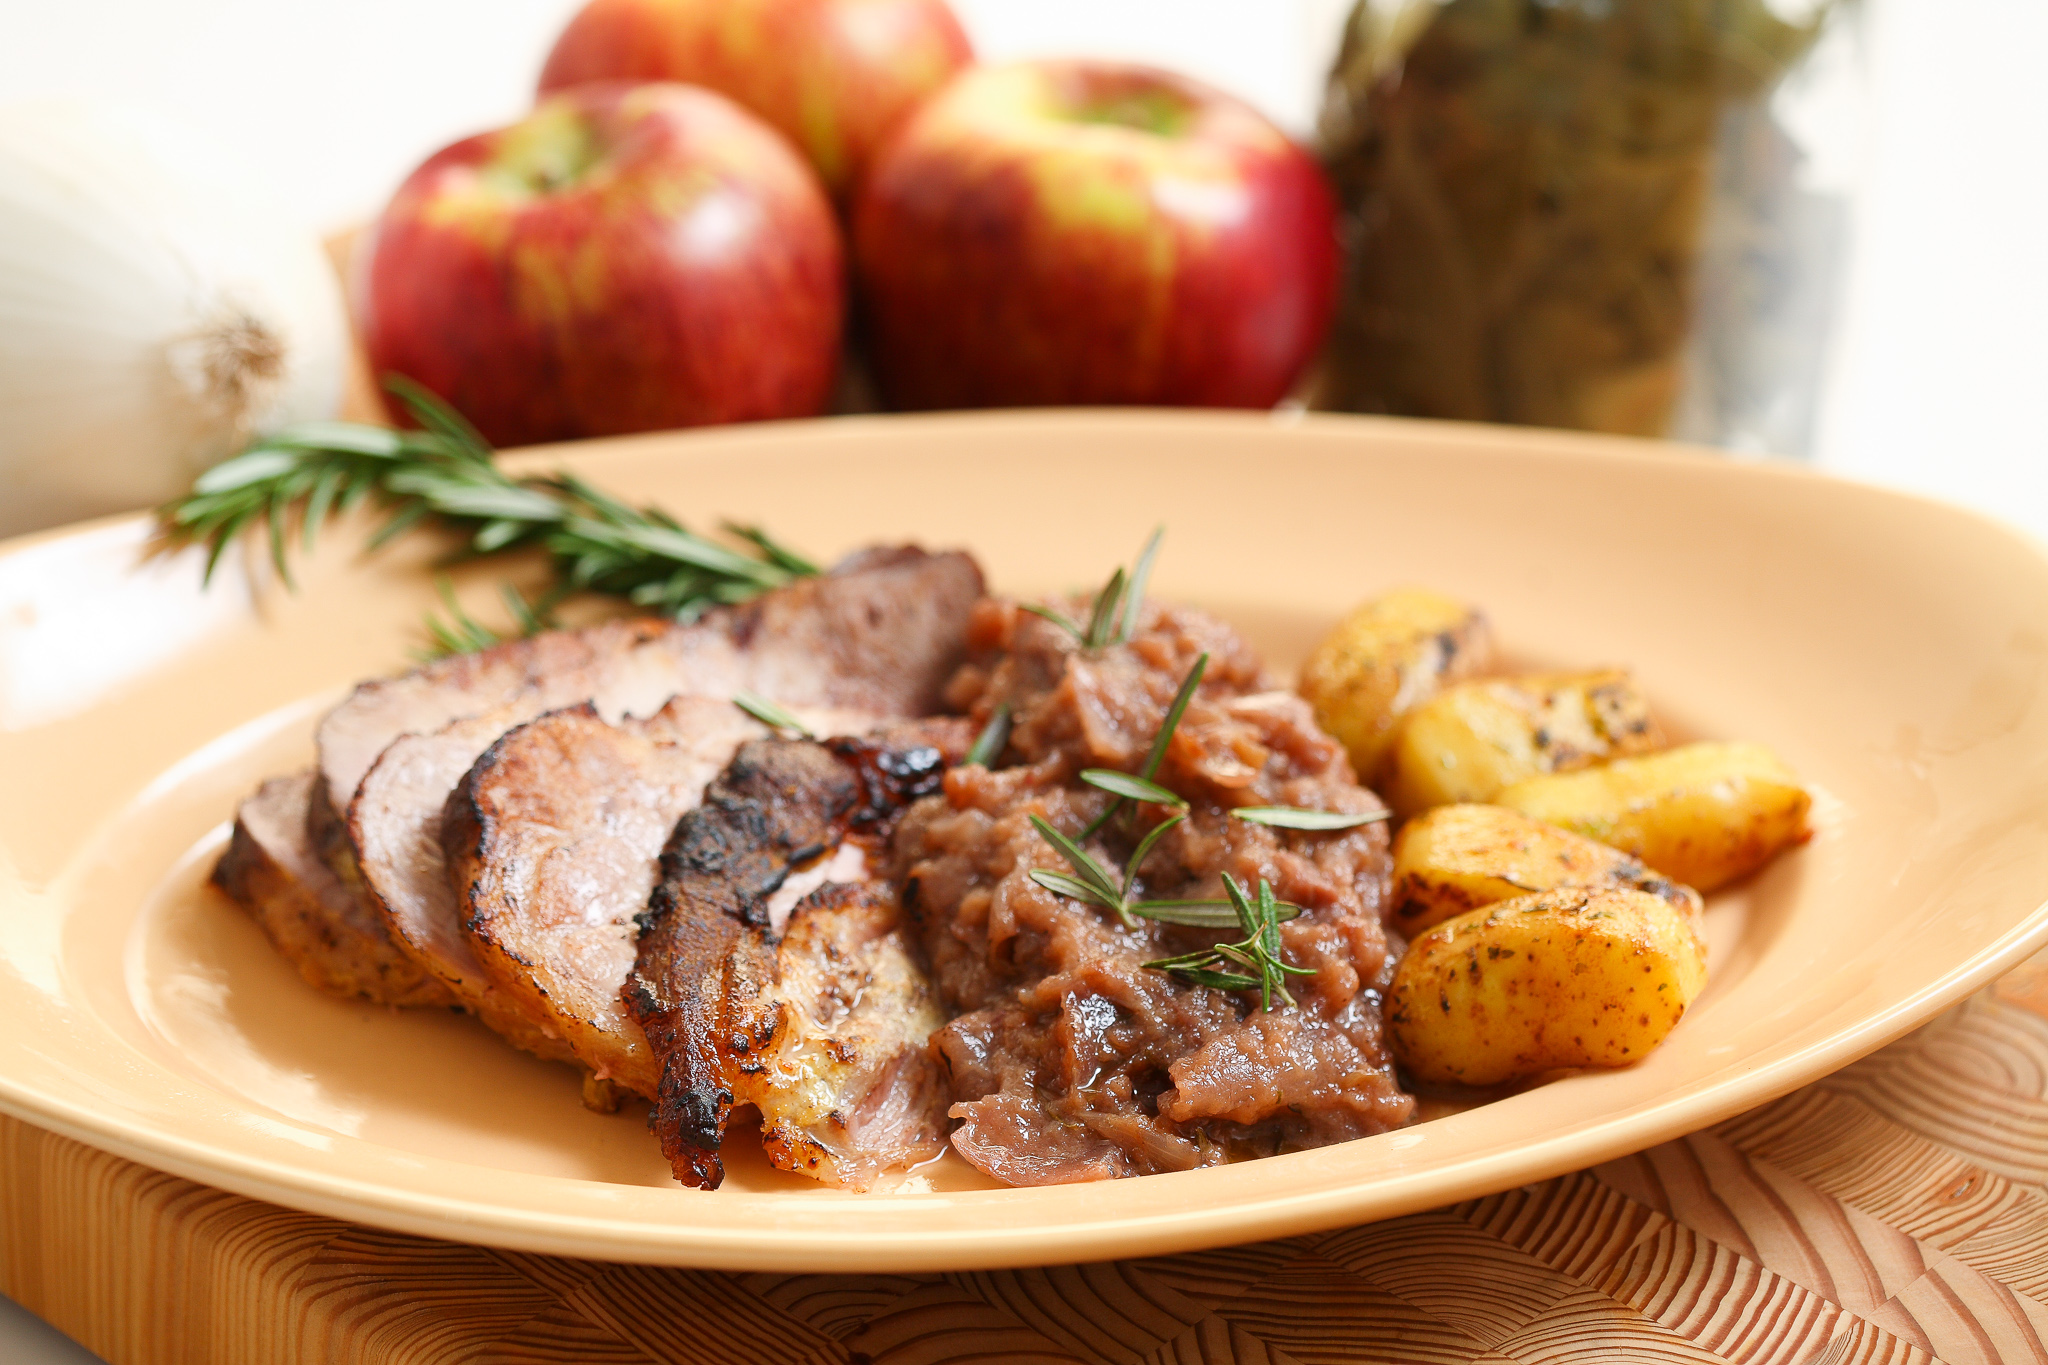 Roast pork with apples and onions